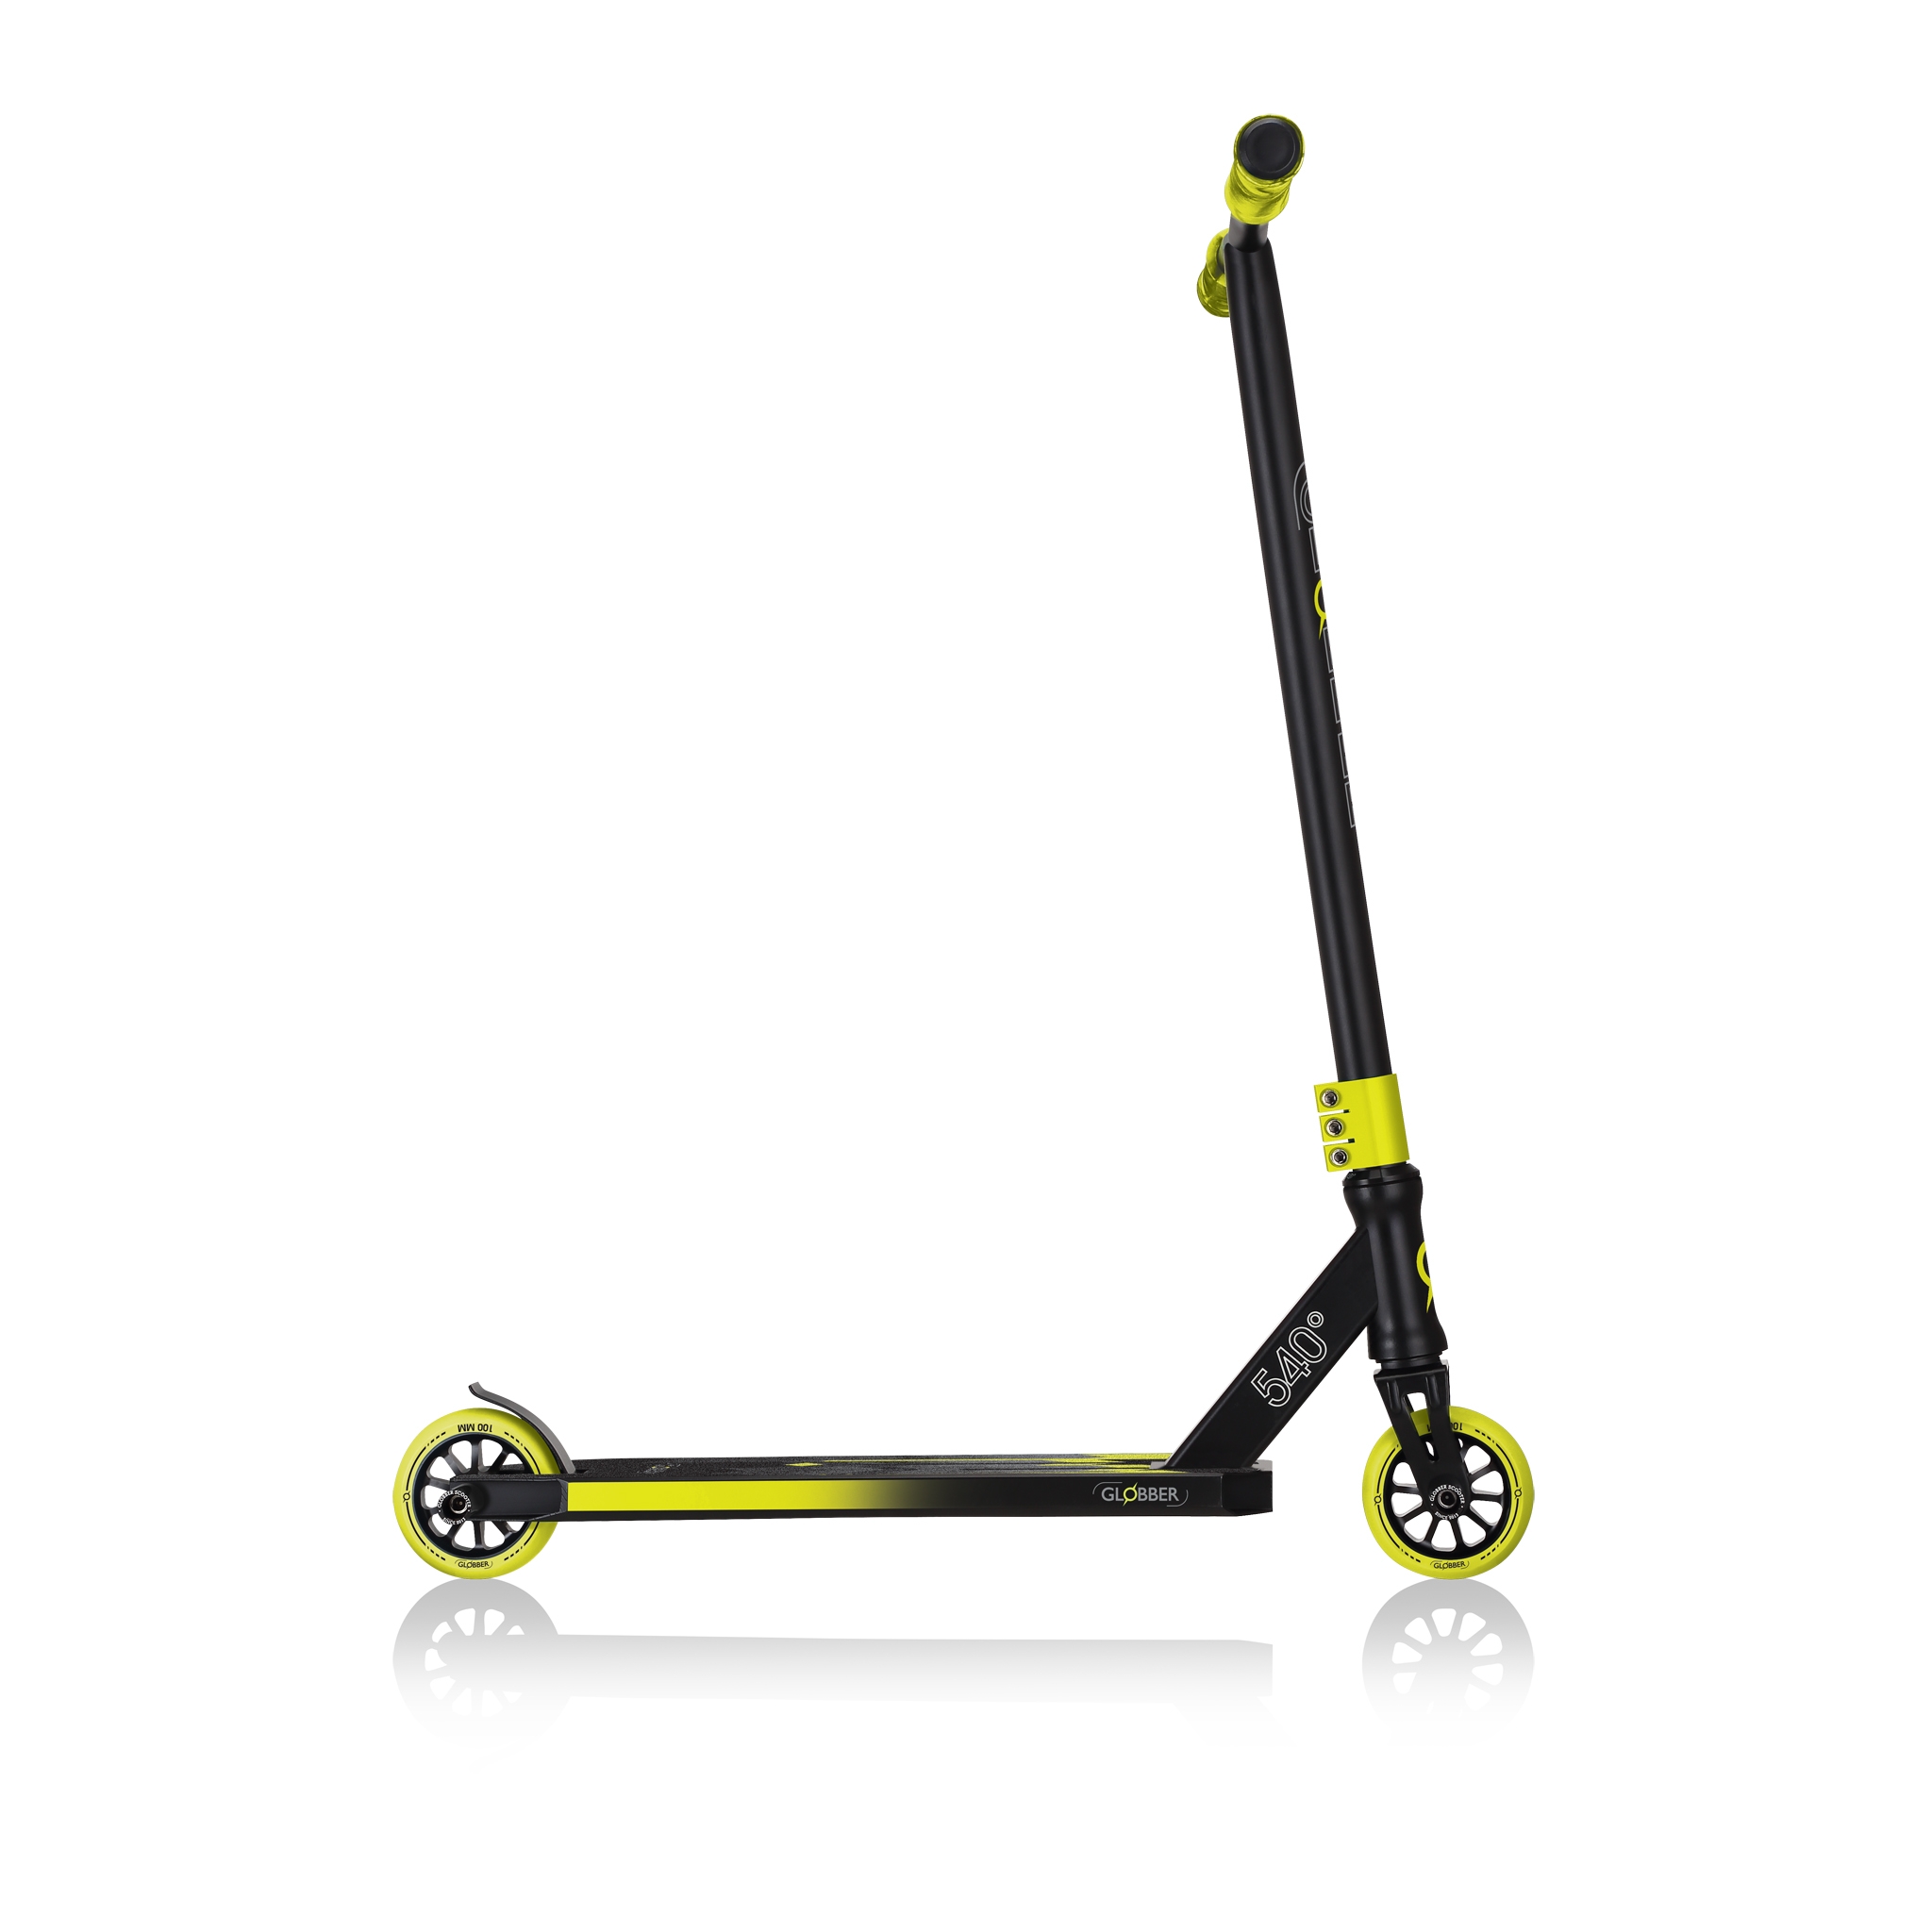 best-stunt-scooter-for-freestyling-Globber-GS540 3